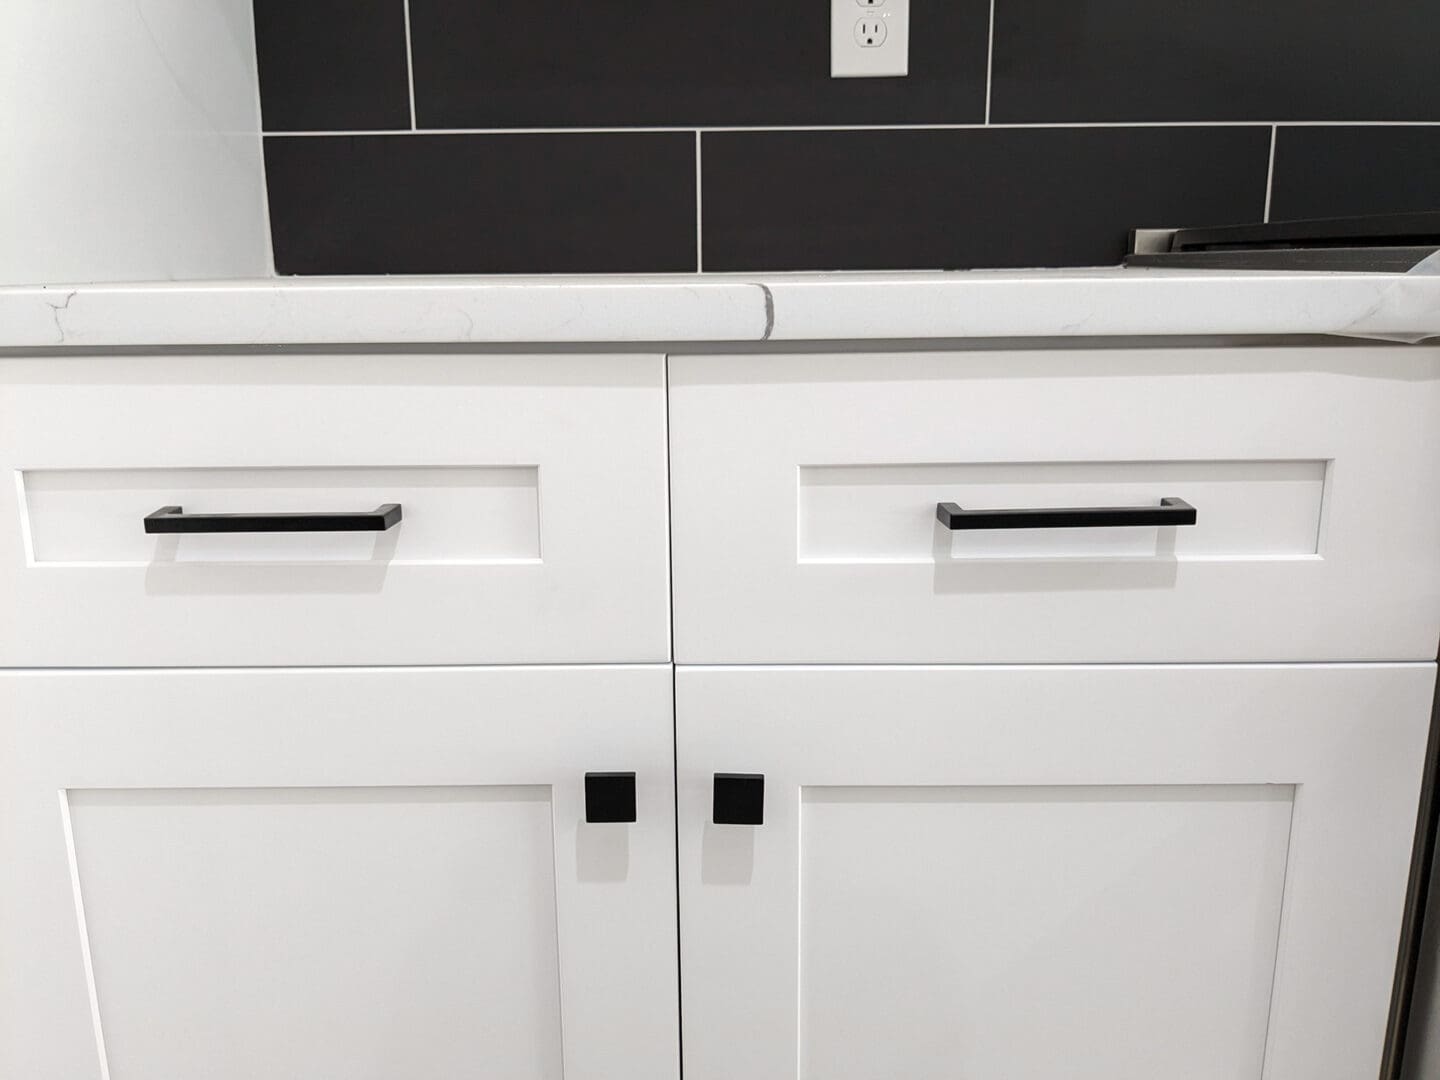 A white cabinet with black handles and knobs.